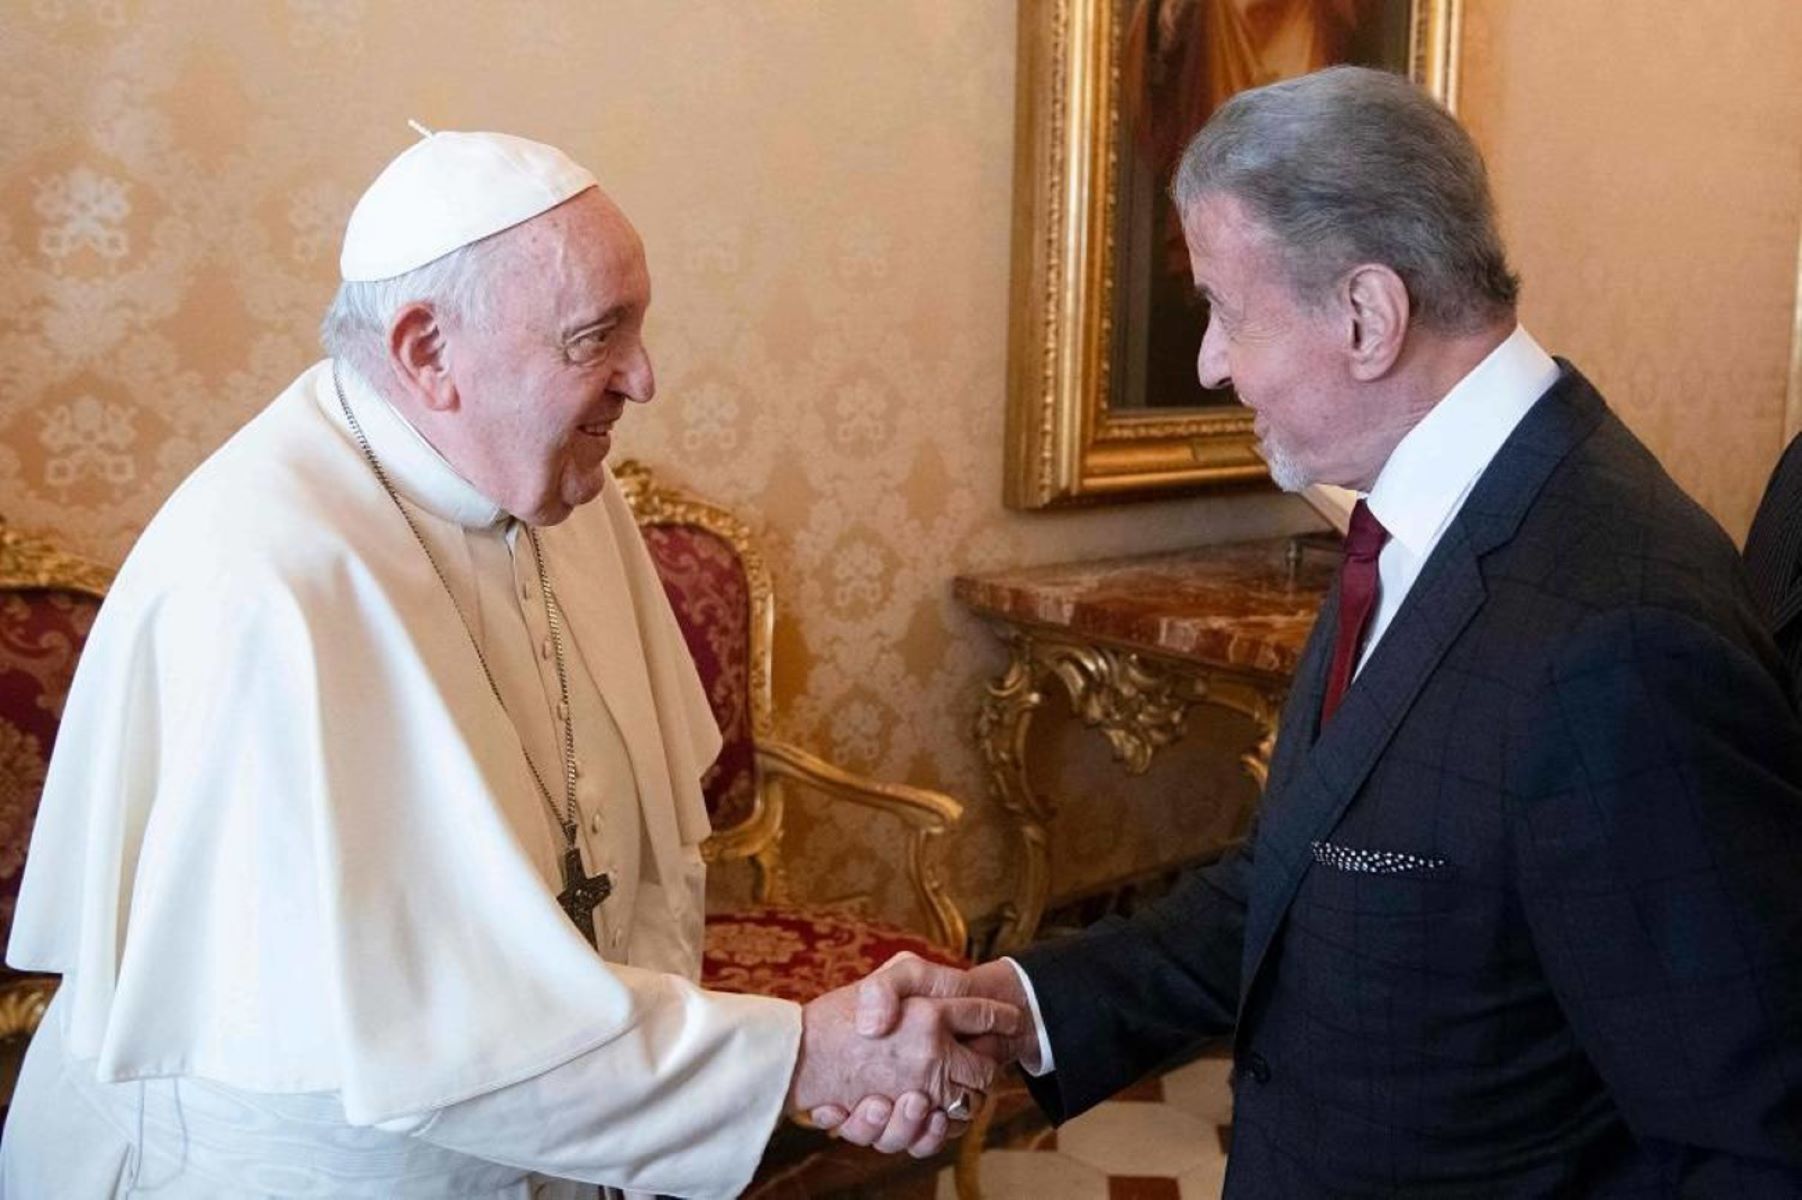 Sylvester Stallone Meets Pope Francis At Vatican, Engages In Friendly Shadowboxing